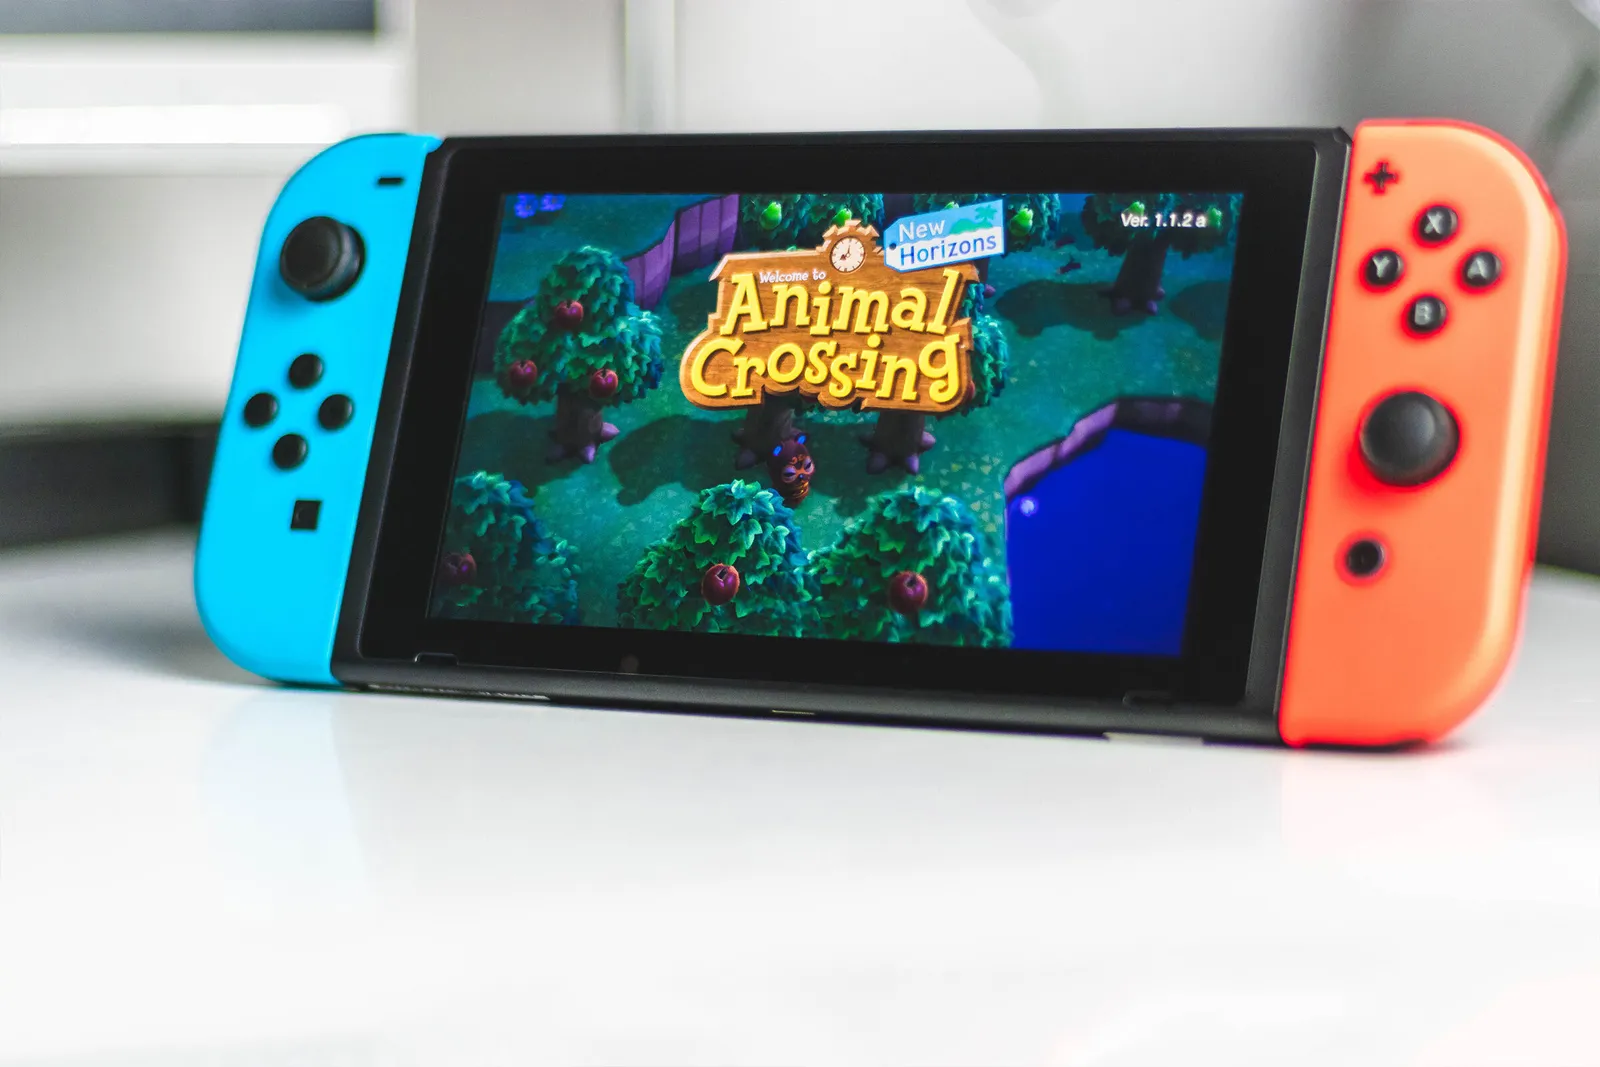 Nintendo games console with animal crossing game on screen